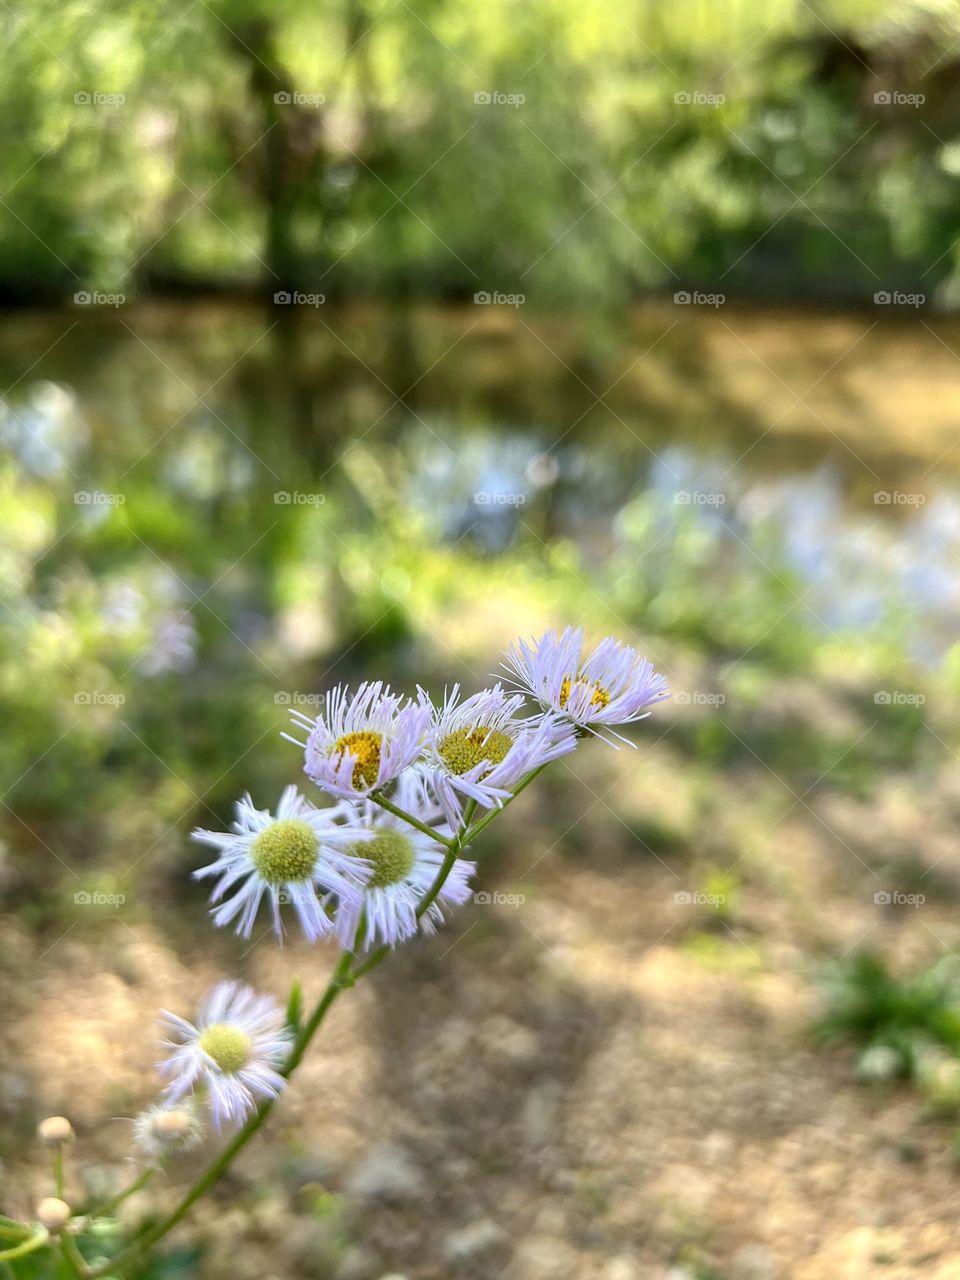 Wild white daisies emerging in the spring. Background is creek and tree reflections.